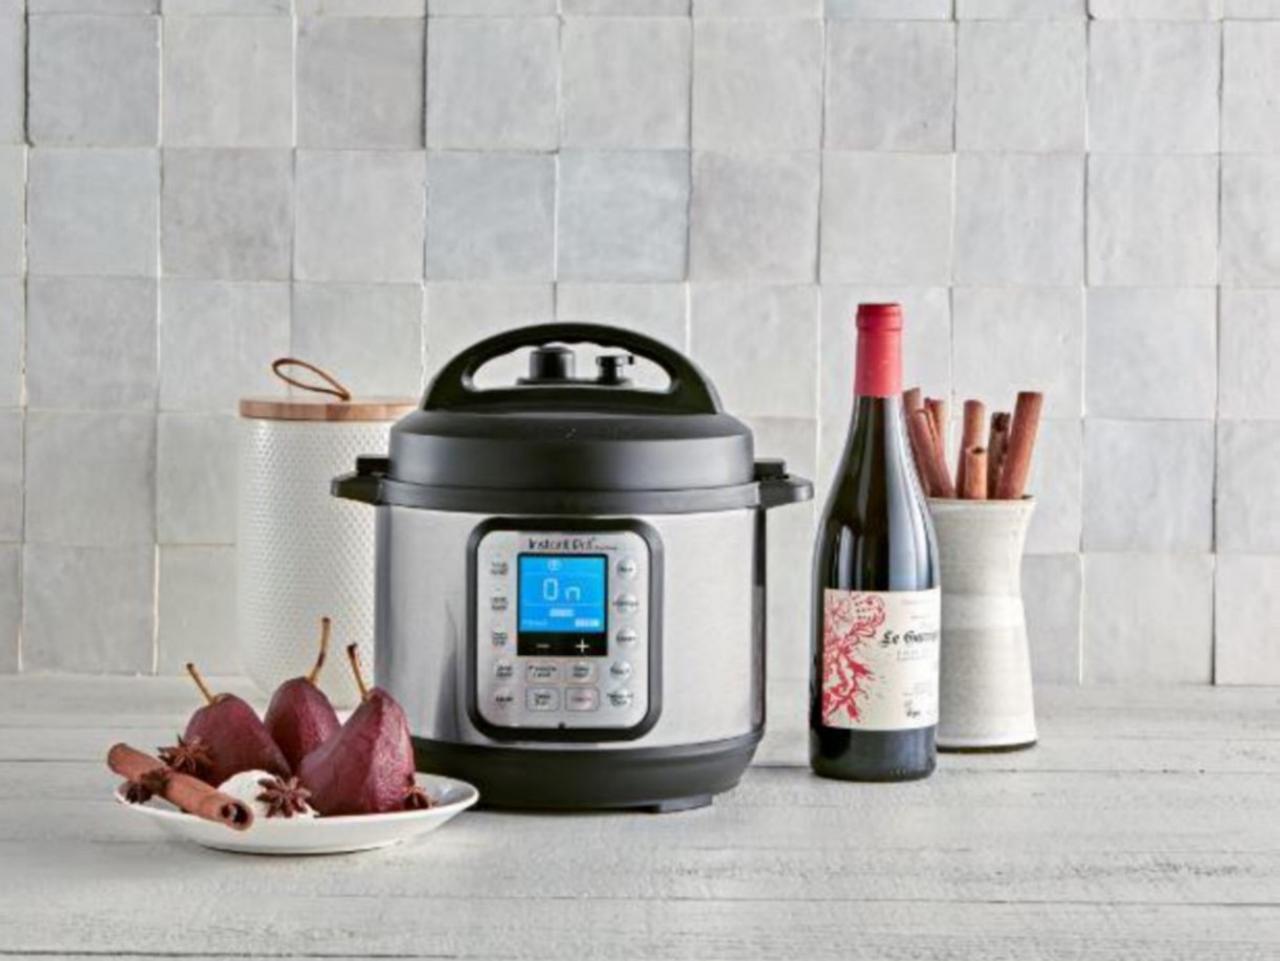 https://food.fnr.sndimg.com/content/dam/images/food/products/2021/4/7/rx_instant-pot-duo-nova-3-quart-7-in-1-one-touch-multi-cooker.jpeg.rend.hgtvcom.1280.960.suffix/1617815902772.jpeg